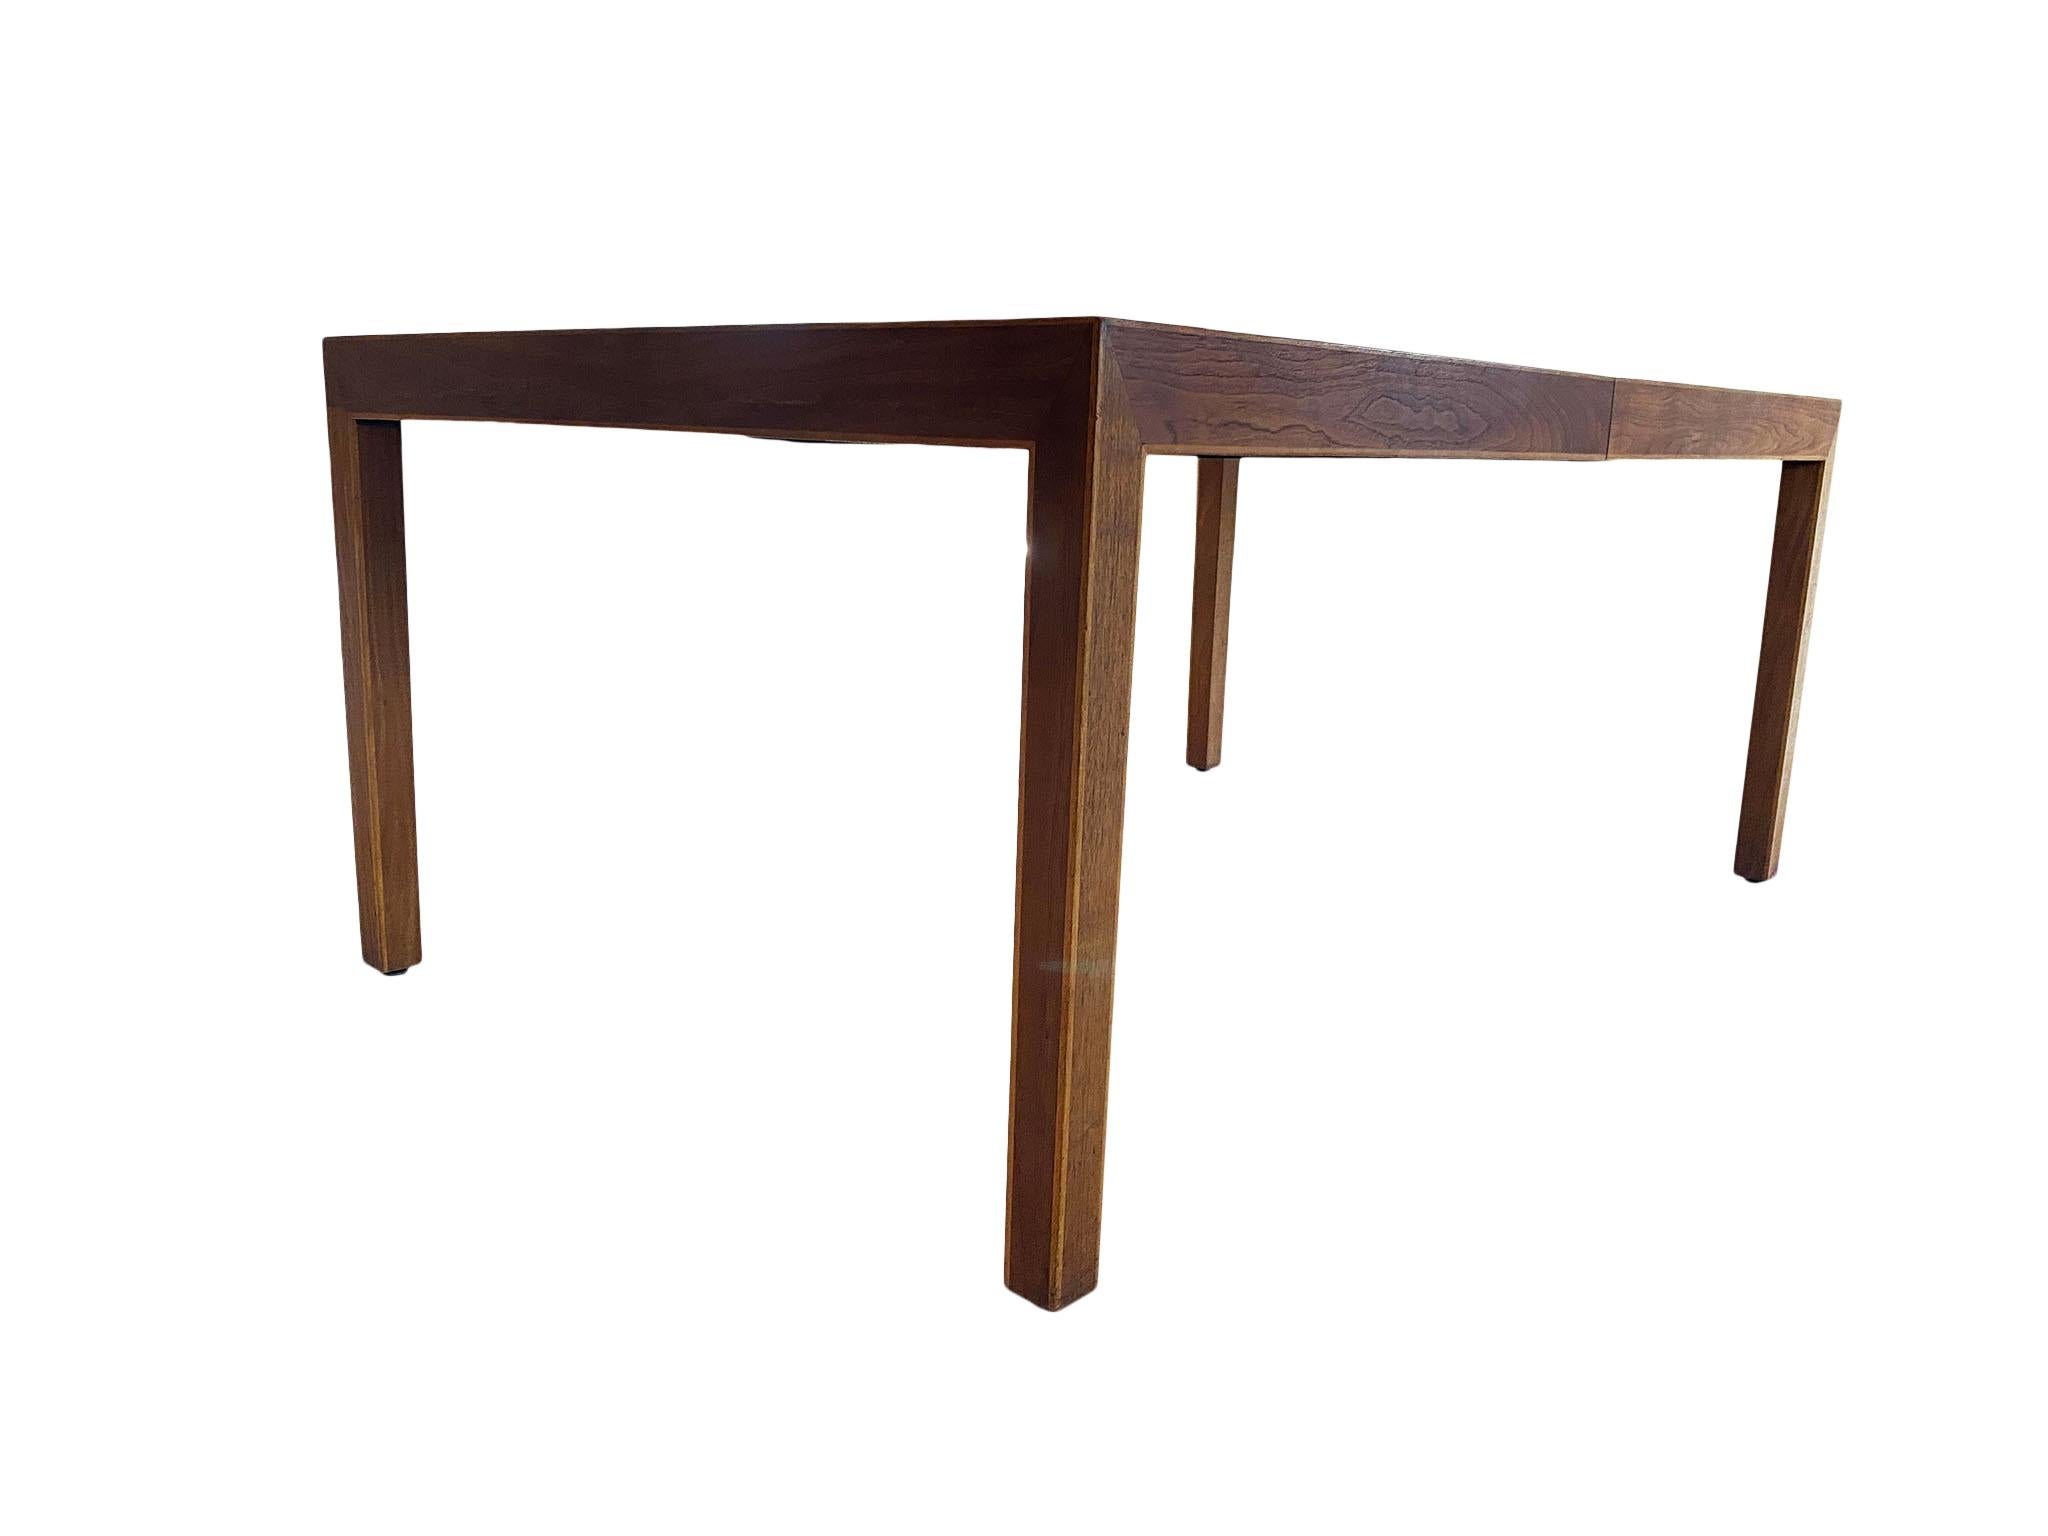 American Midcentury Milo Baughman Walnut Expandable Parsons Dining Table with '2' Leaves